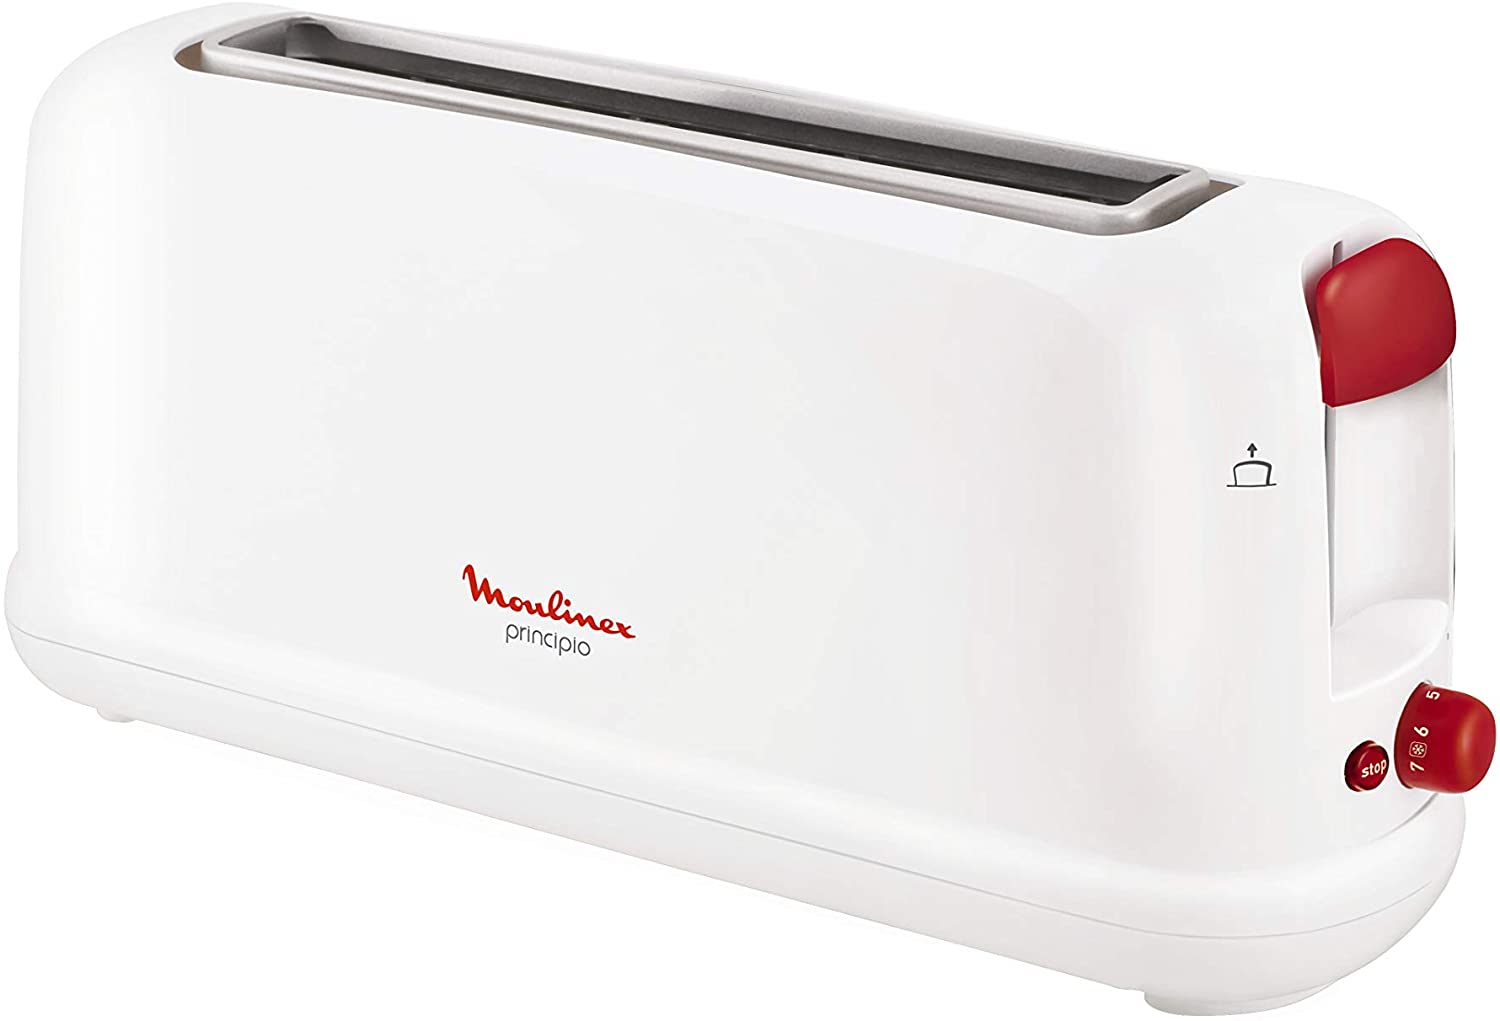 Moulinex Principio LS160111 Long Slot Toaster 25 cm Crumb Drawer with 7 Levels, Defrost Function and Shut-Off Button for a Variety of Bread, White